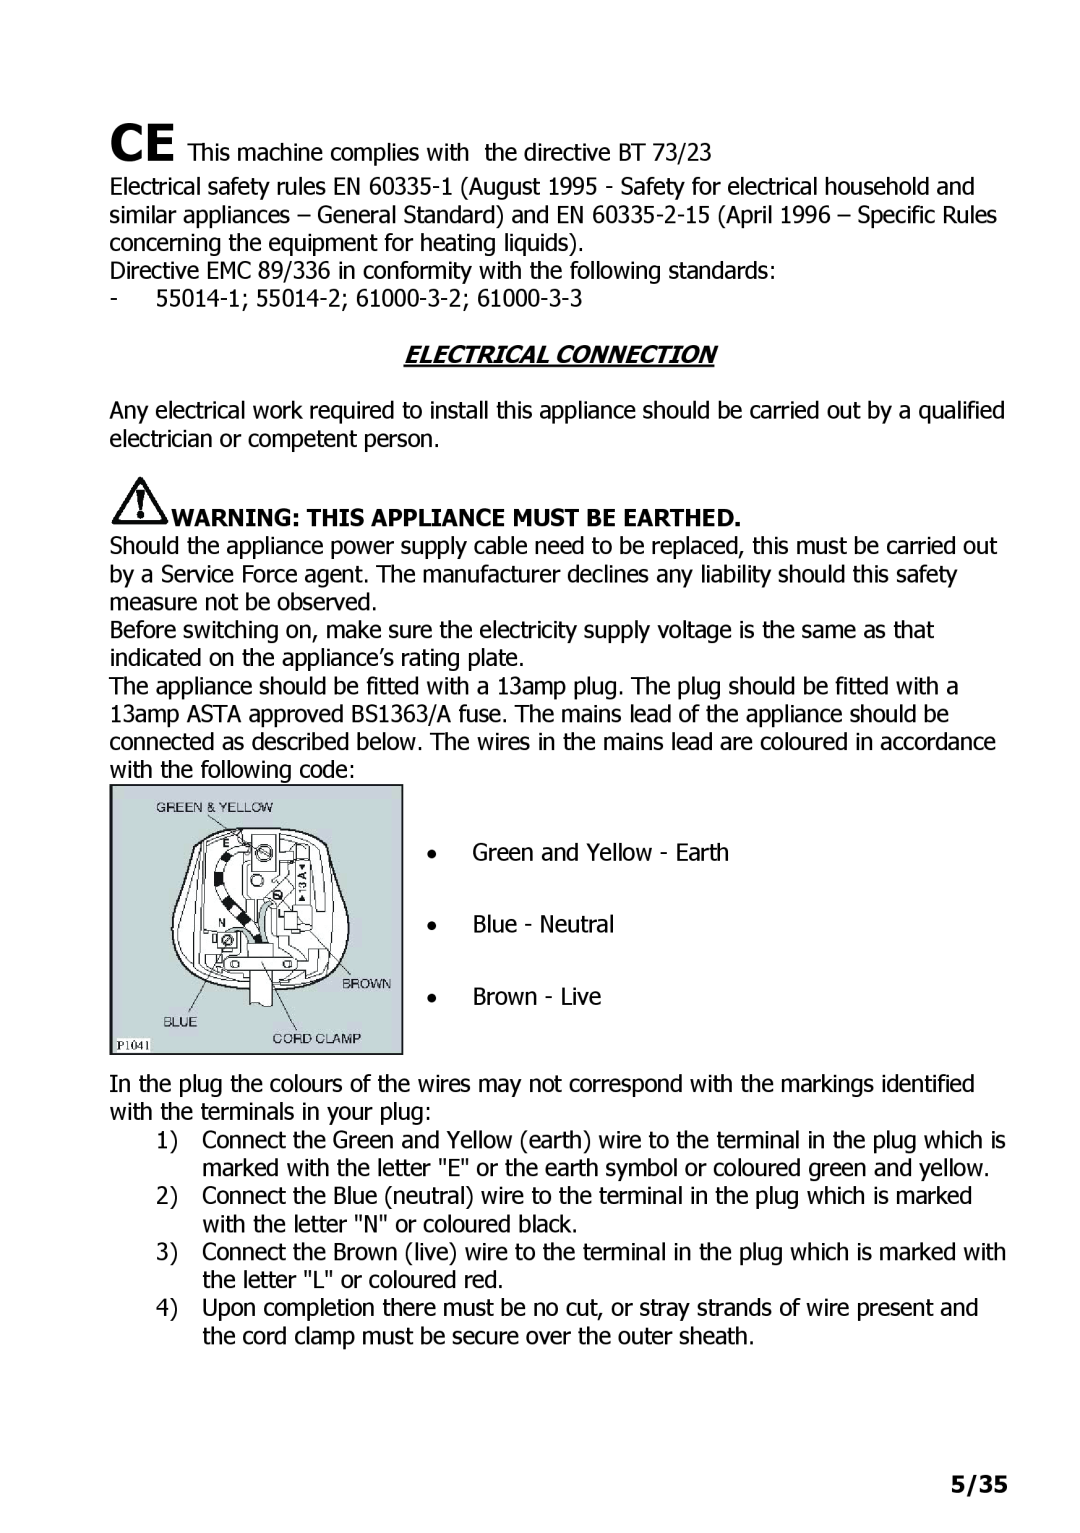 Electrolux PE 9038-m fww installation instructions Electrical Connection, Warning This Appliance Must Be Earthed, 5/35 